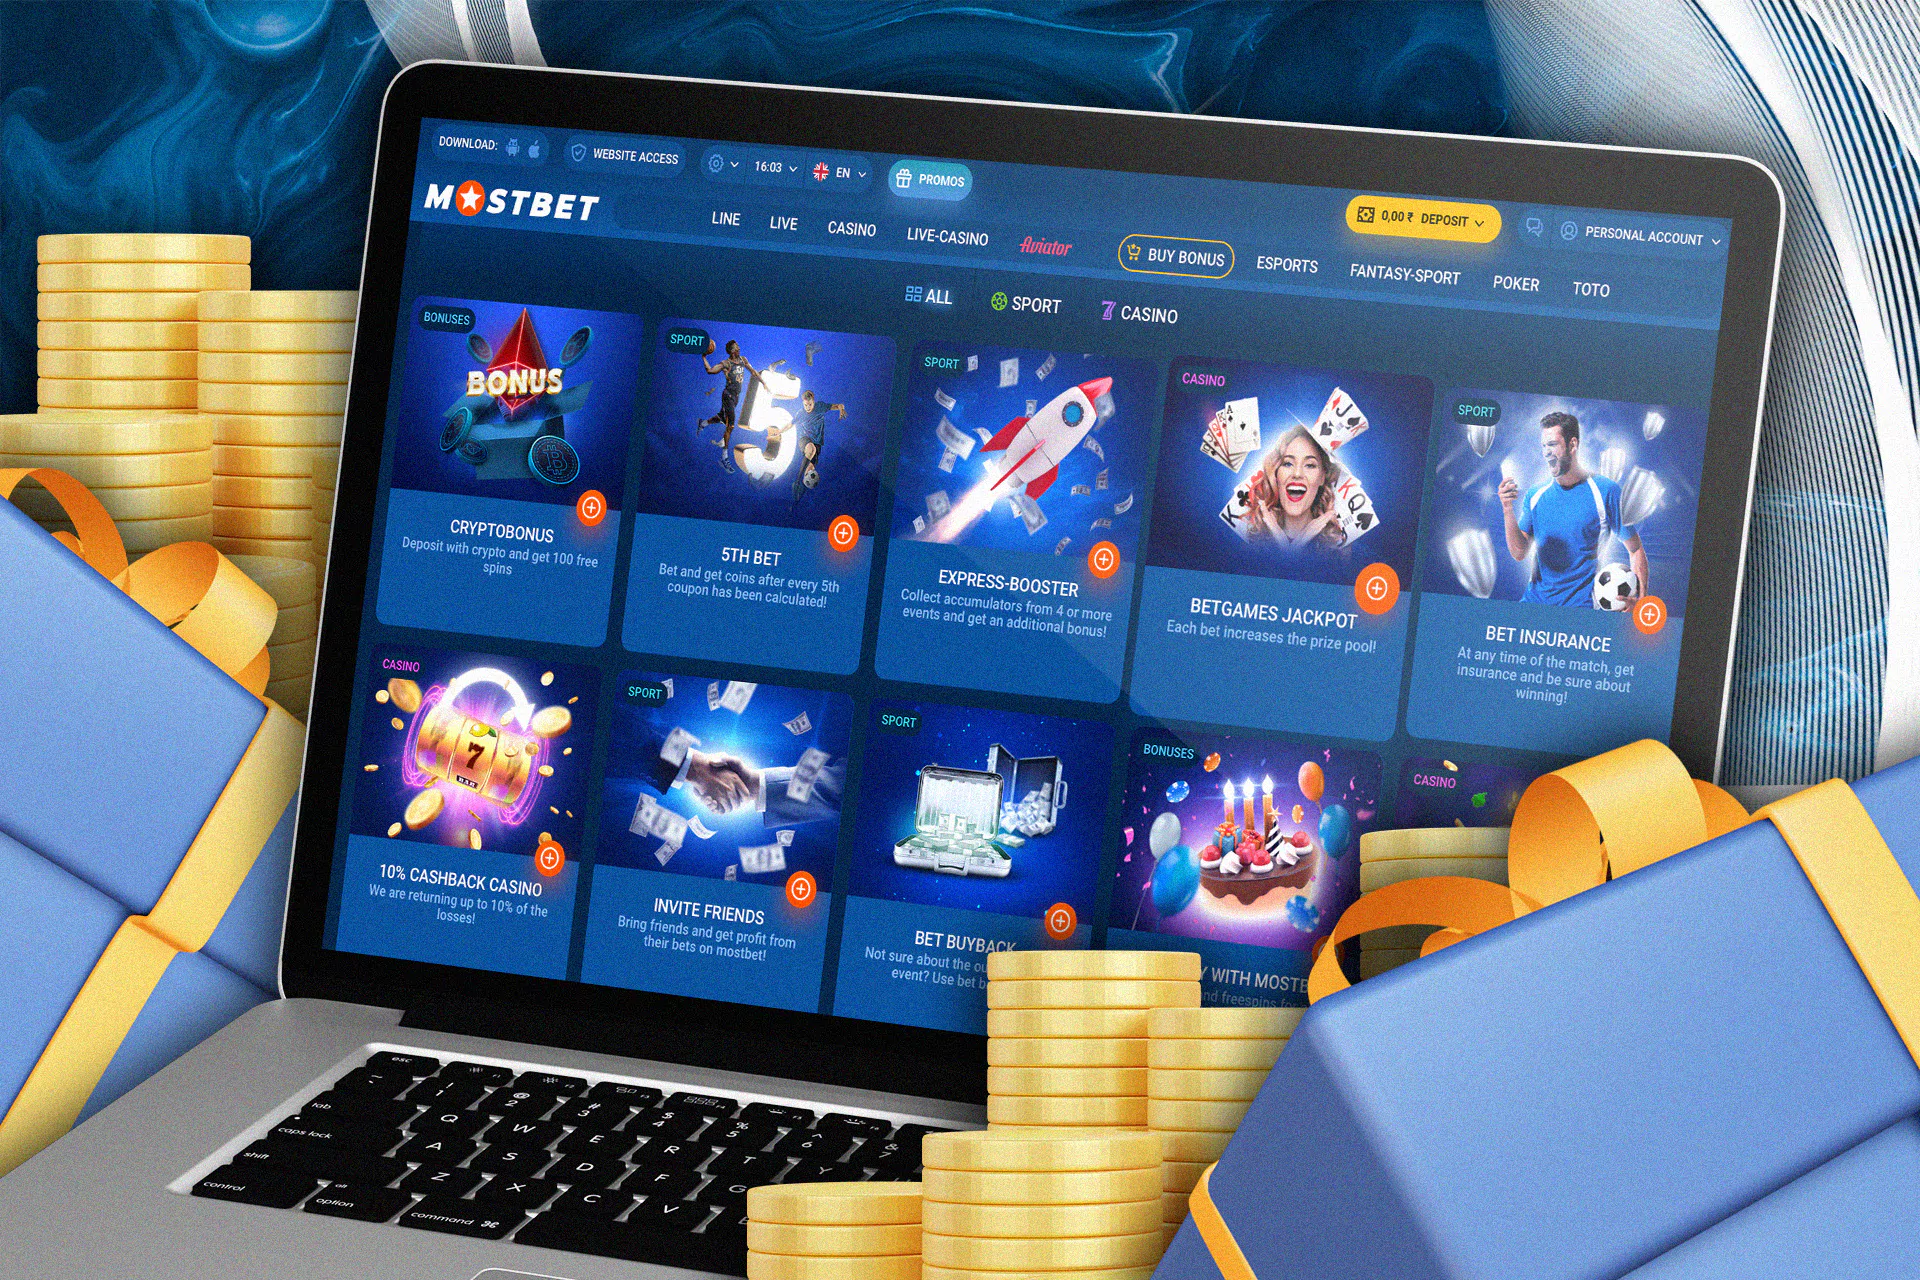 The list of all Mostbet bonuses: first deposit bonus, cryptobonus, 5th bet bonus, booster bonus, betgames jackpot, bet insuranse and others.